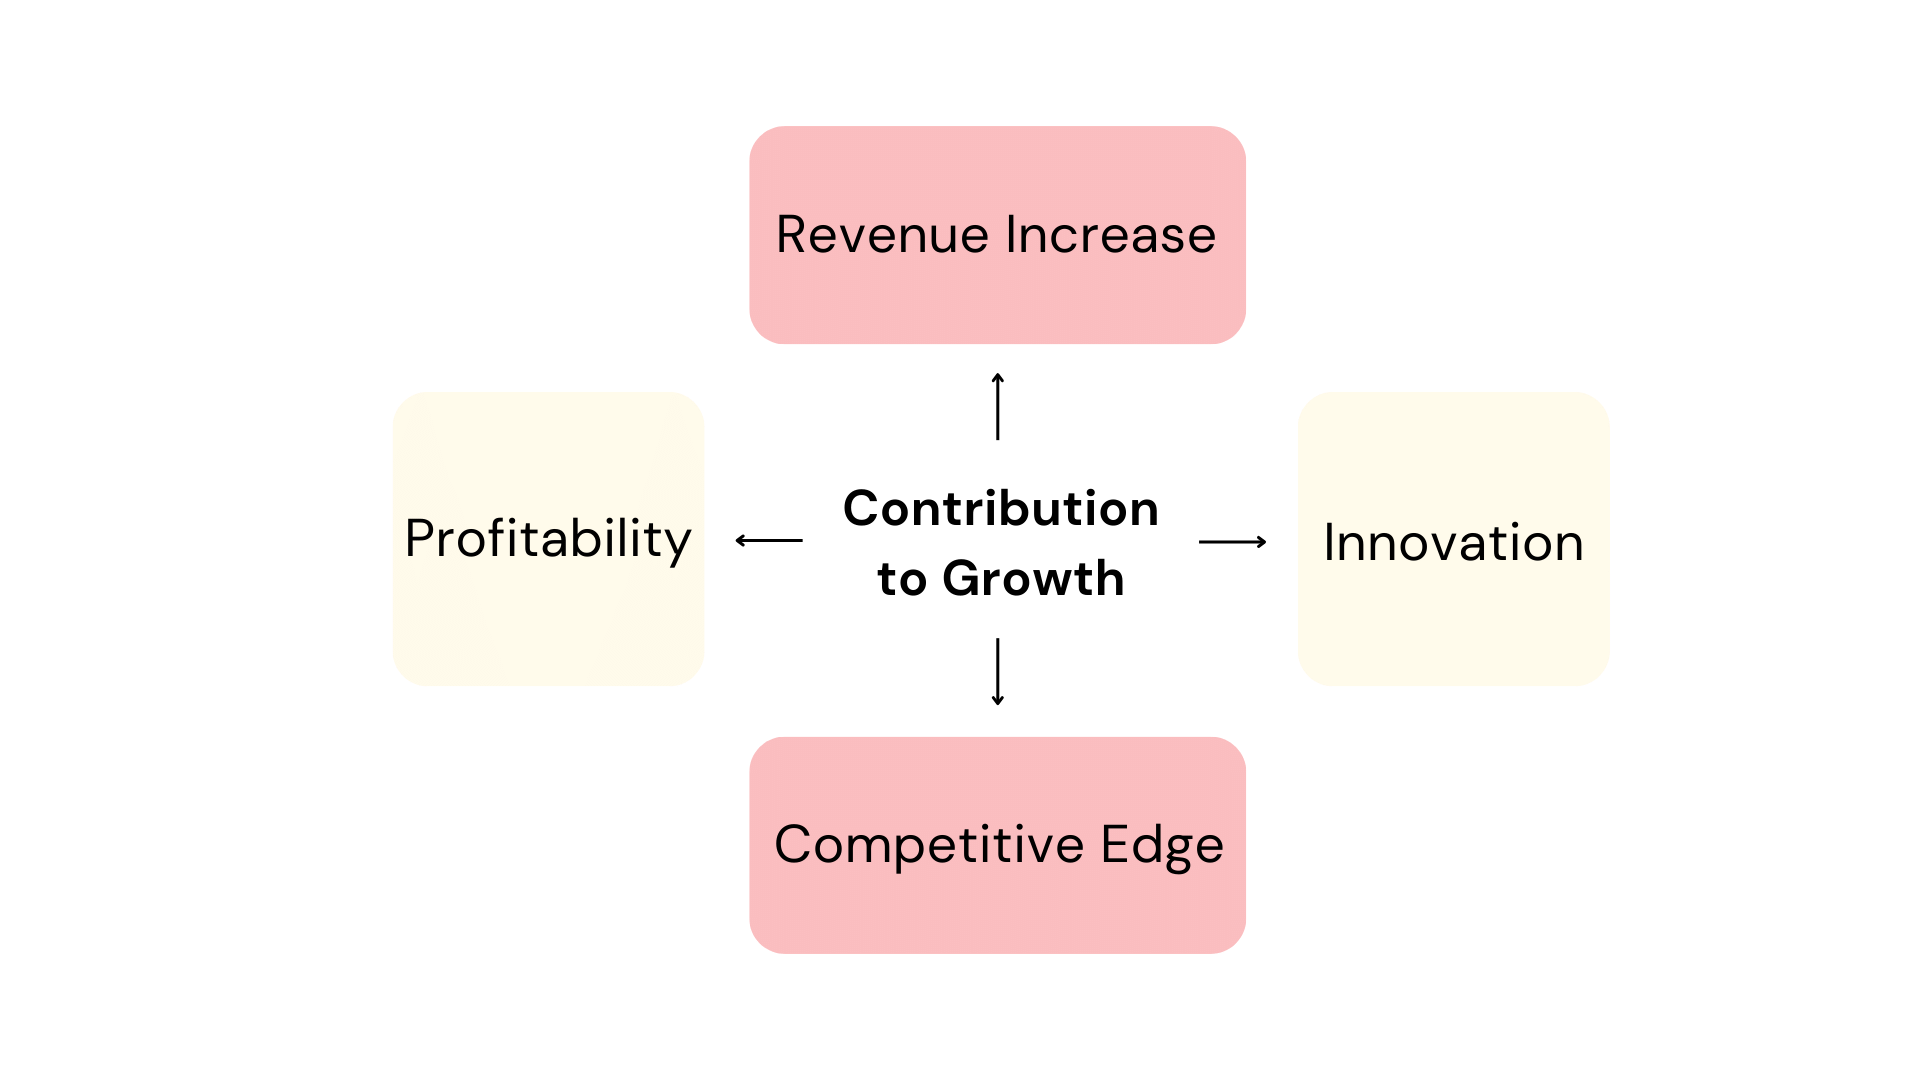 Contribution to Growth